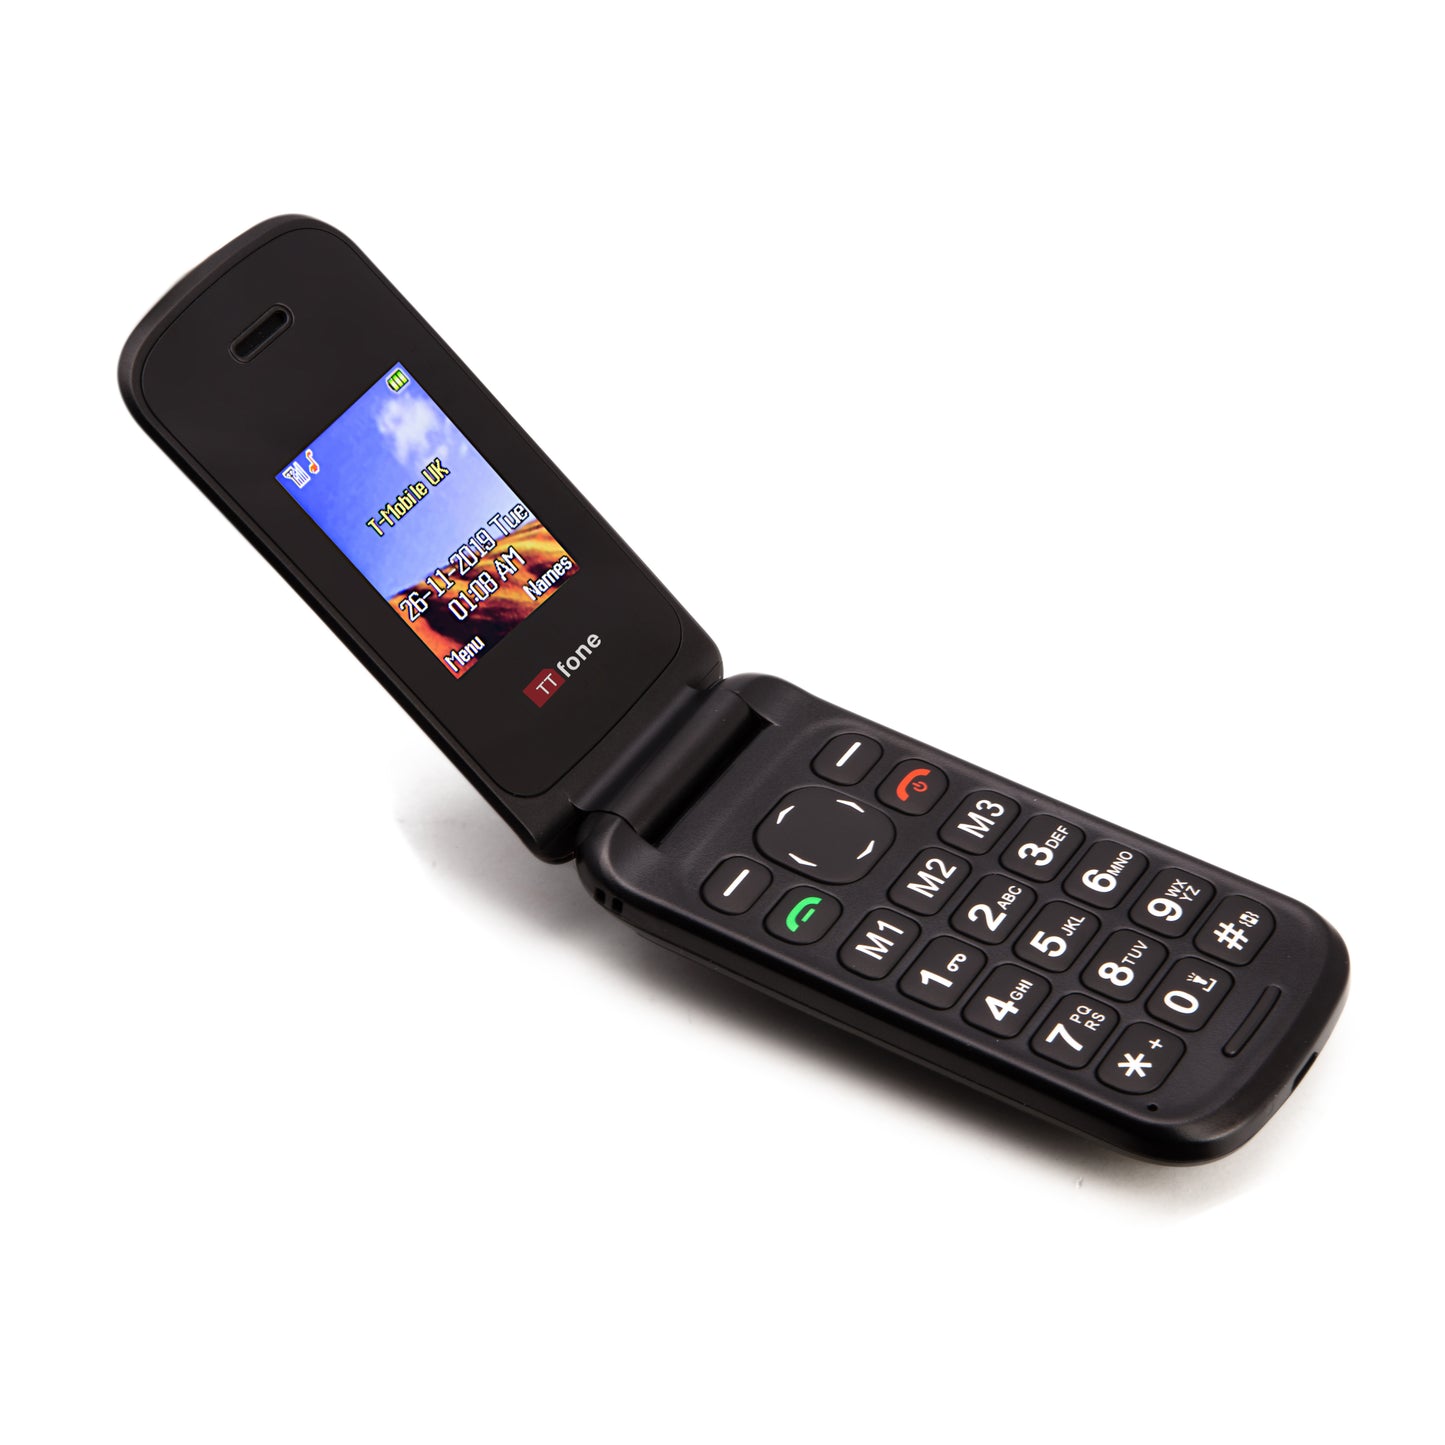 TTfone Black TT140 - Warehouse Deals with USB Cable and Vodafone Pay As You Go